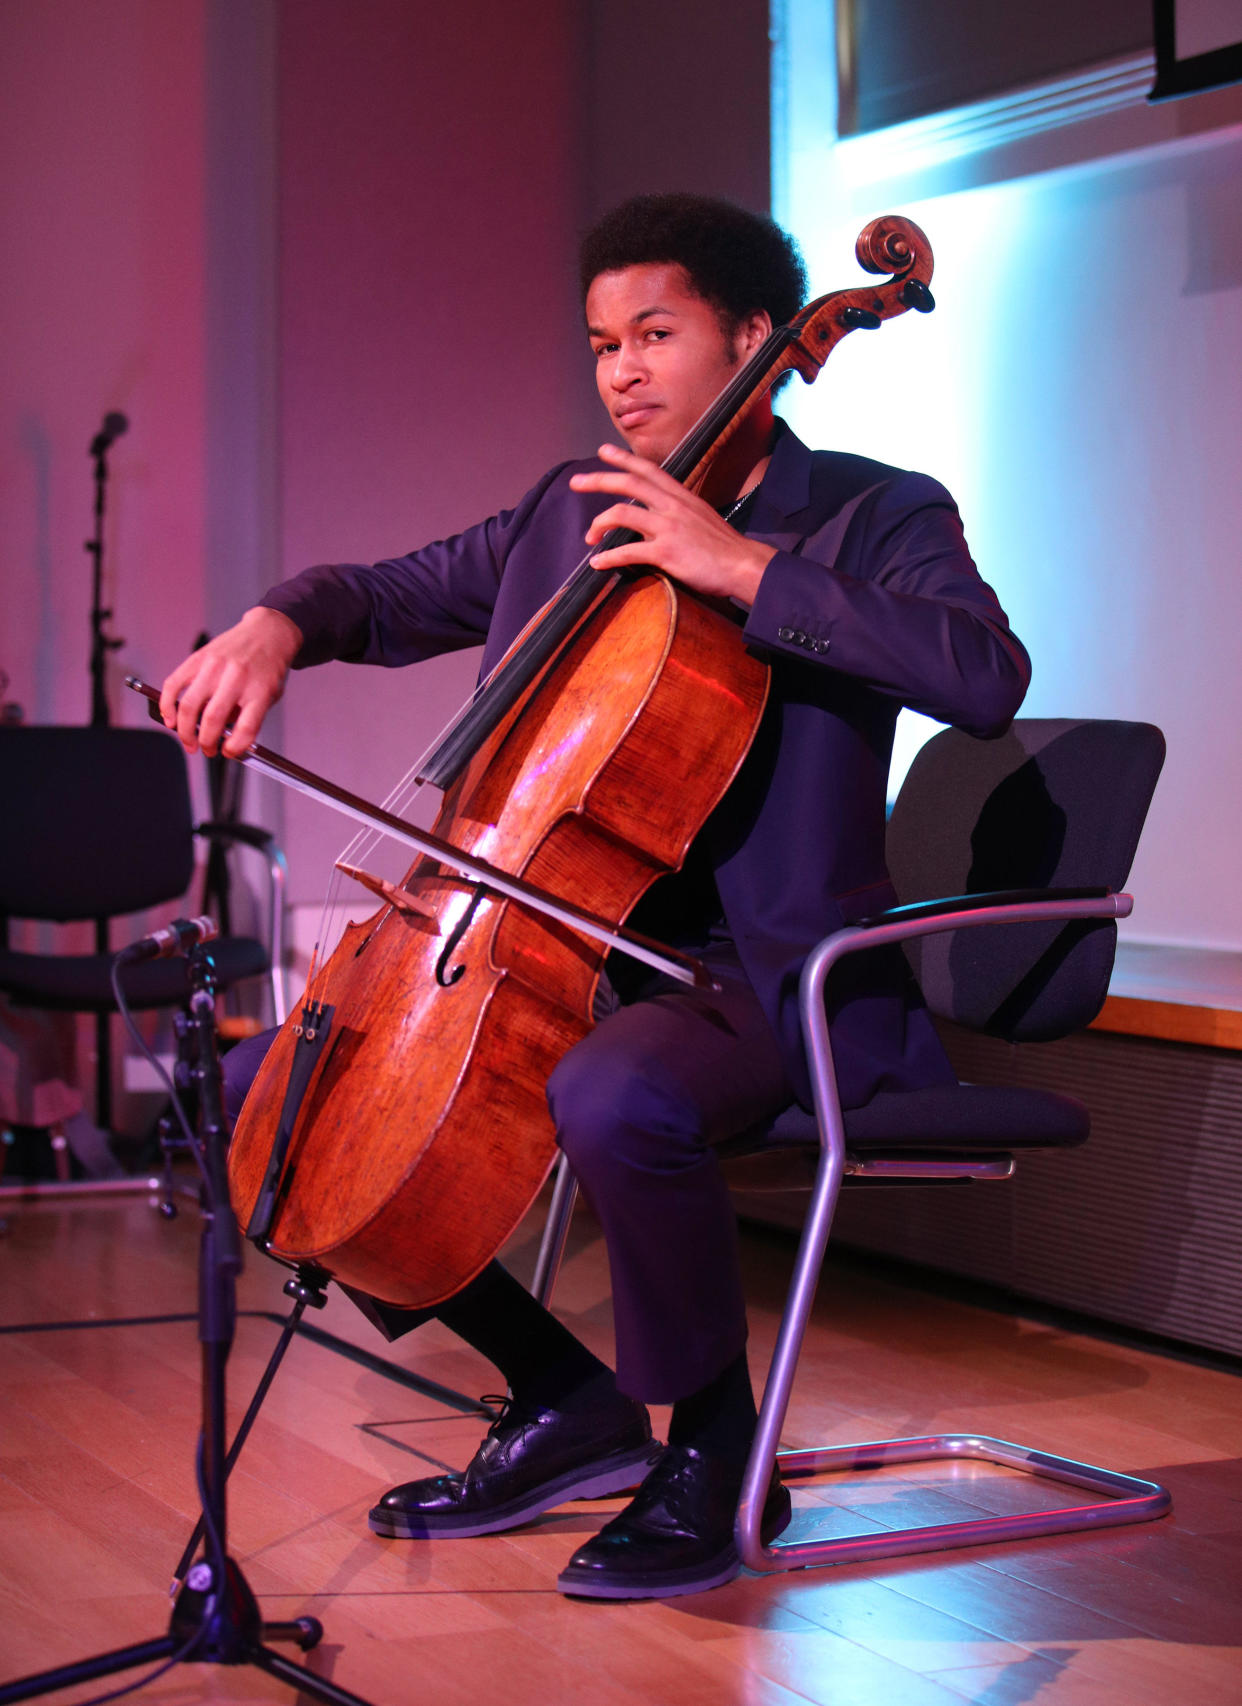 British cellist Sheku Kanneh-Mason, who played at the wedding of Prince Harry to Meghan Markle on 19 May 2018, performing during the one-day event Decca 90: A Celebration, at the V&A in London.